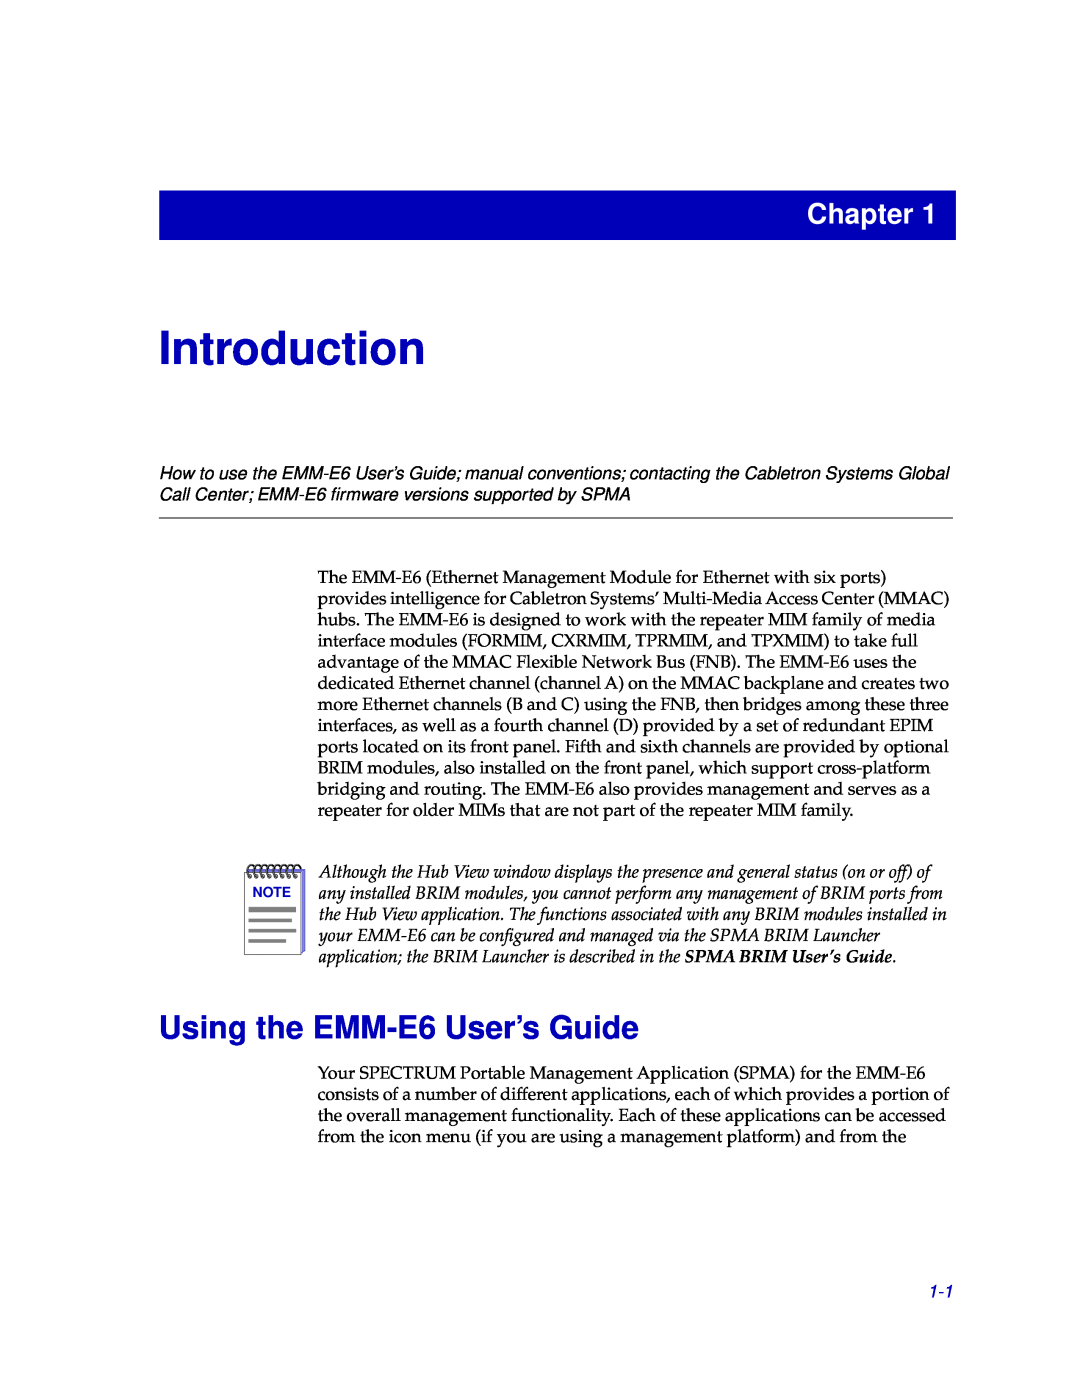 Cabletron Systems manual Introduction, Using the EMM-E6 User’s Guide, Chapter 